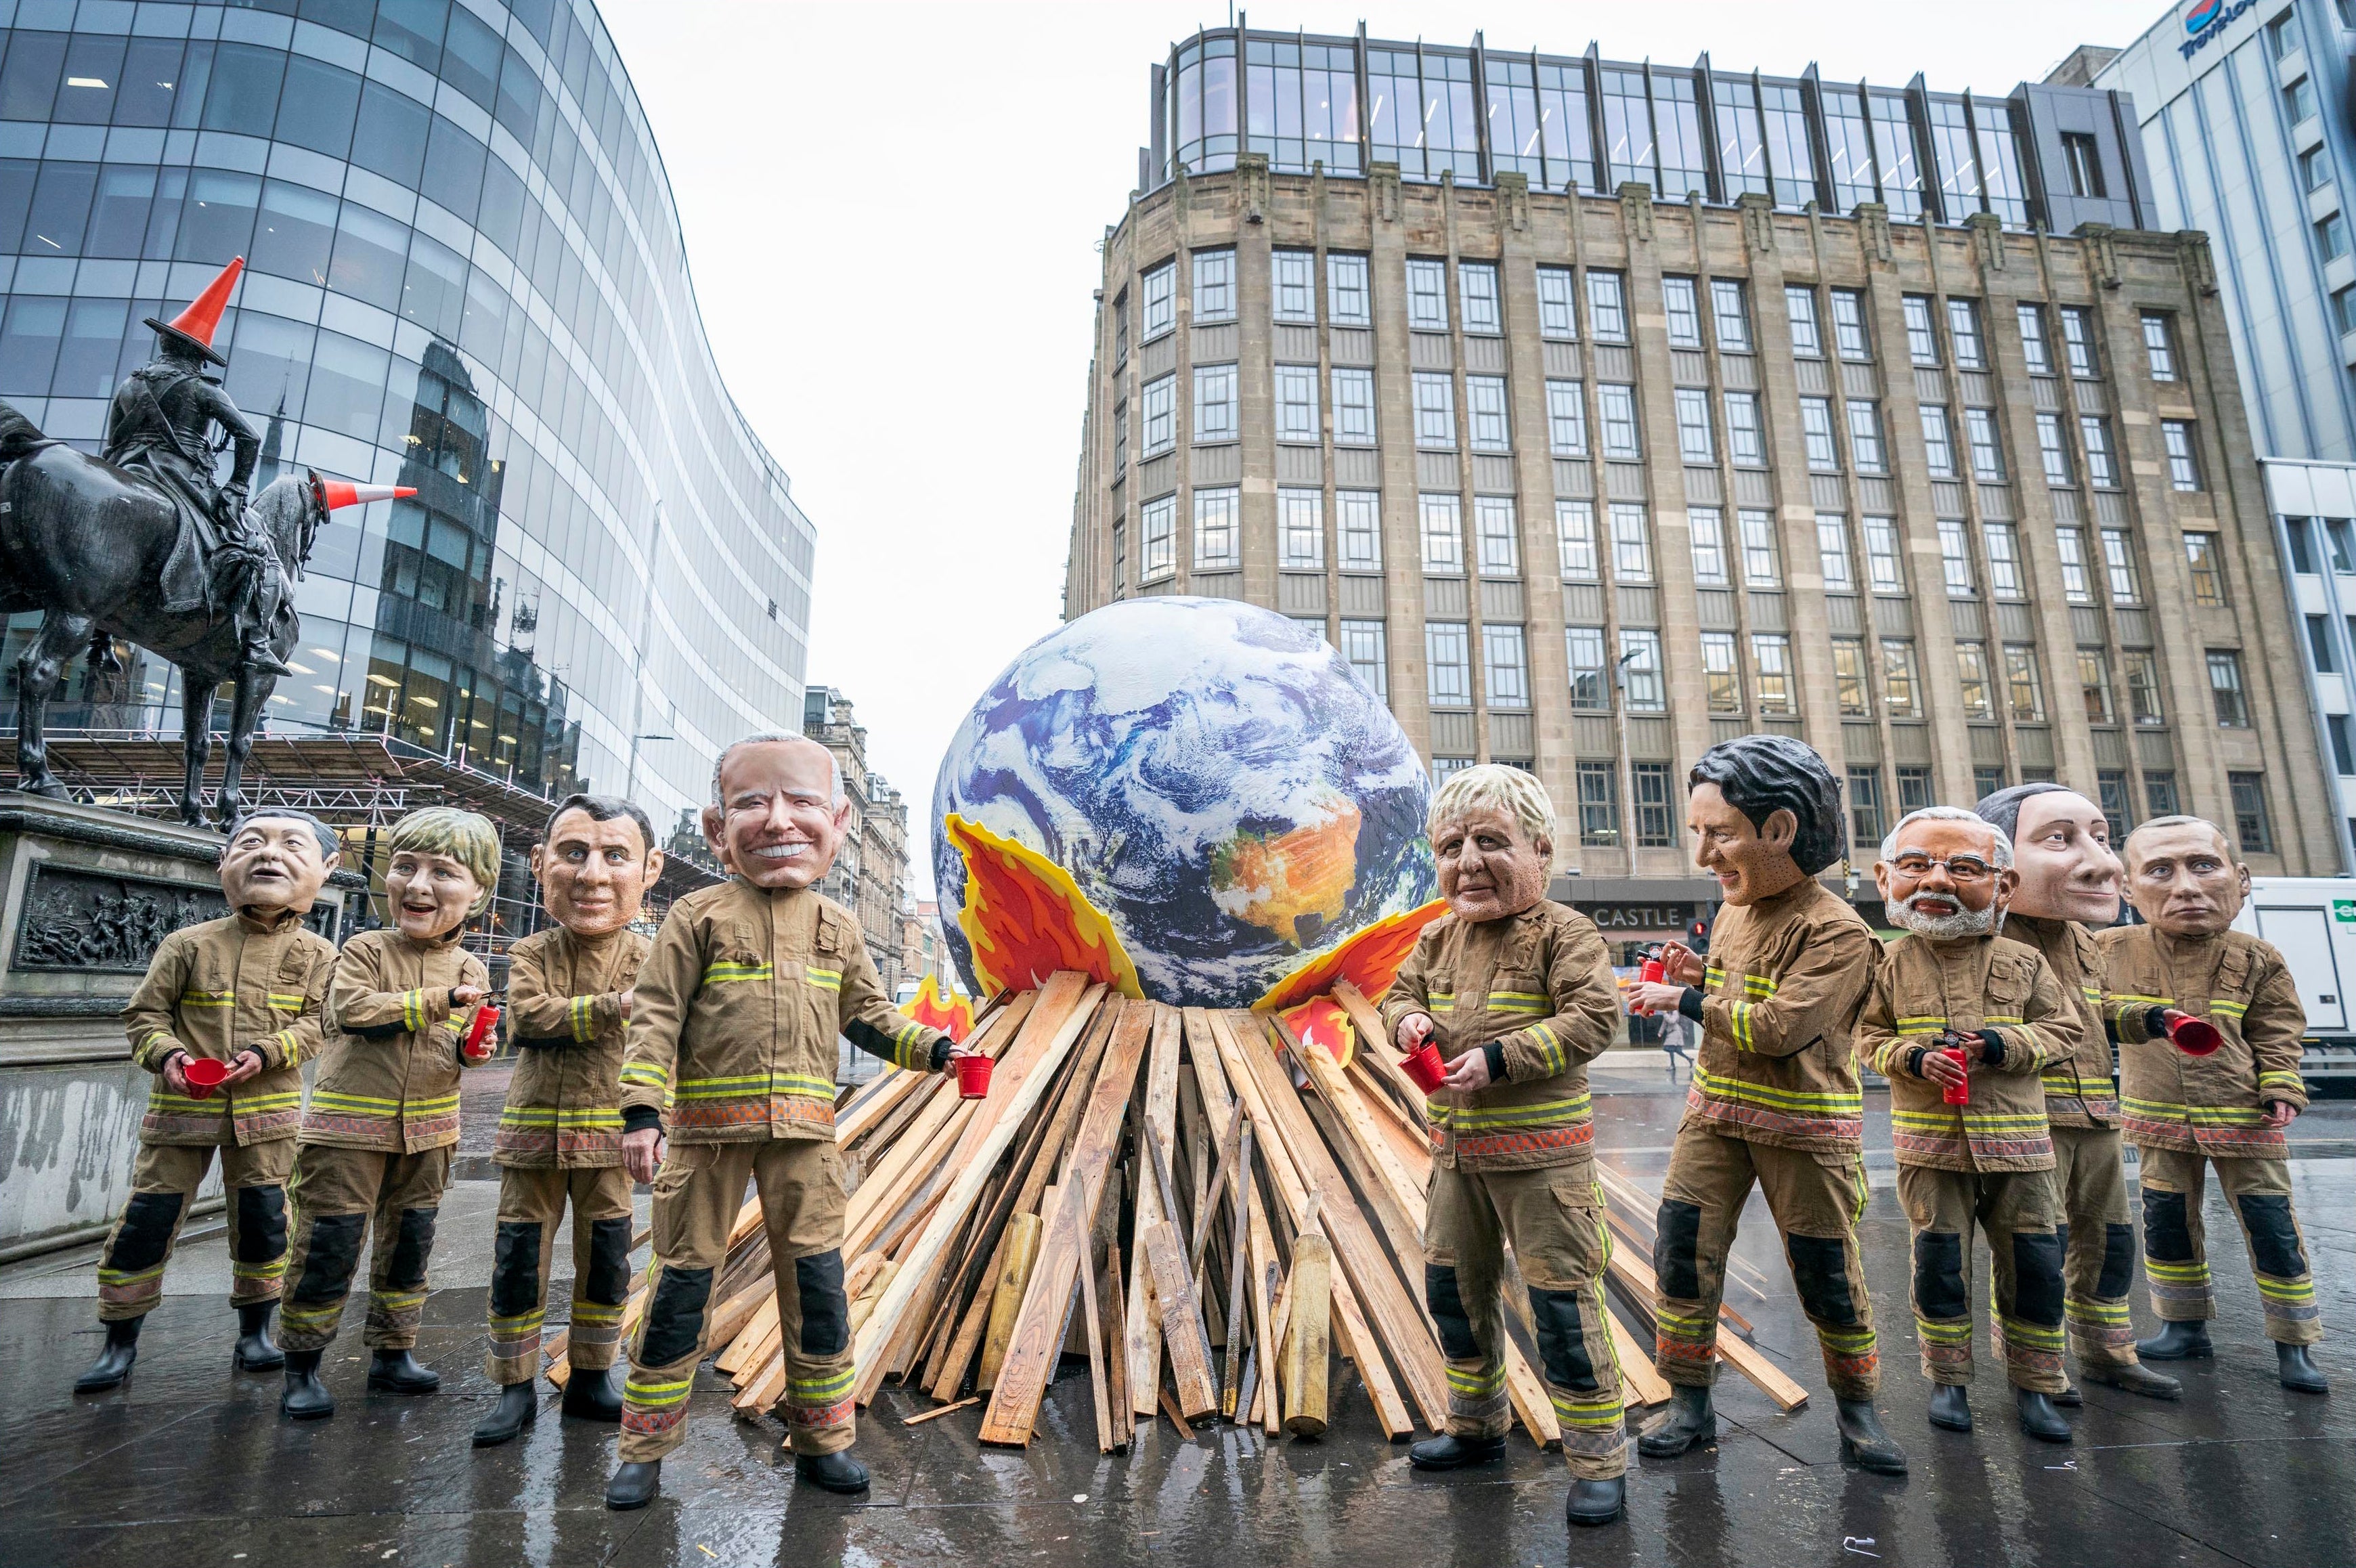 Campaigners wearing 'big heads' of world leaders, including Boris Johnson, Joe Biden, Justin Trudeau and Narendra Modi gather for Oxfam's 'Ineffective Fire-Fighting World Leaders' protest performance in front of a 10 foot globe with a simulated bonfire, during the official final day of the Cop26 summit in Glasgow